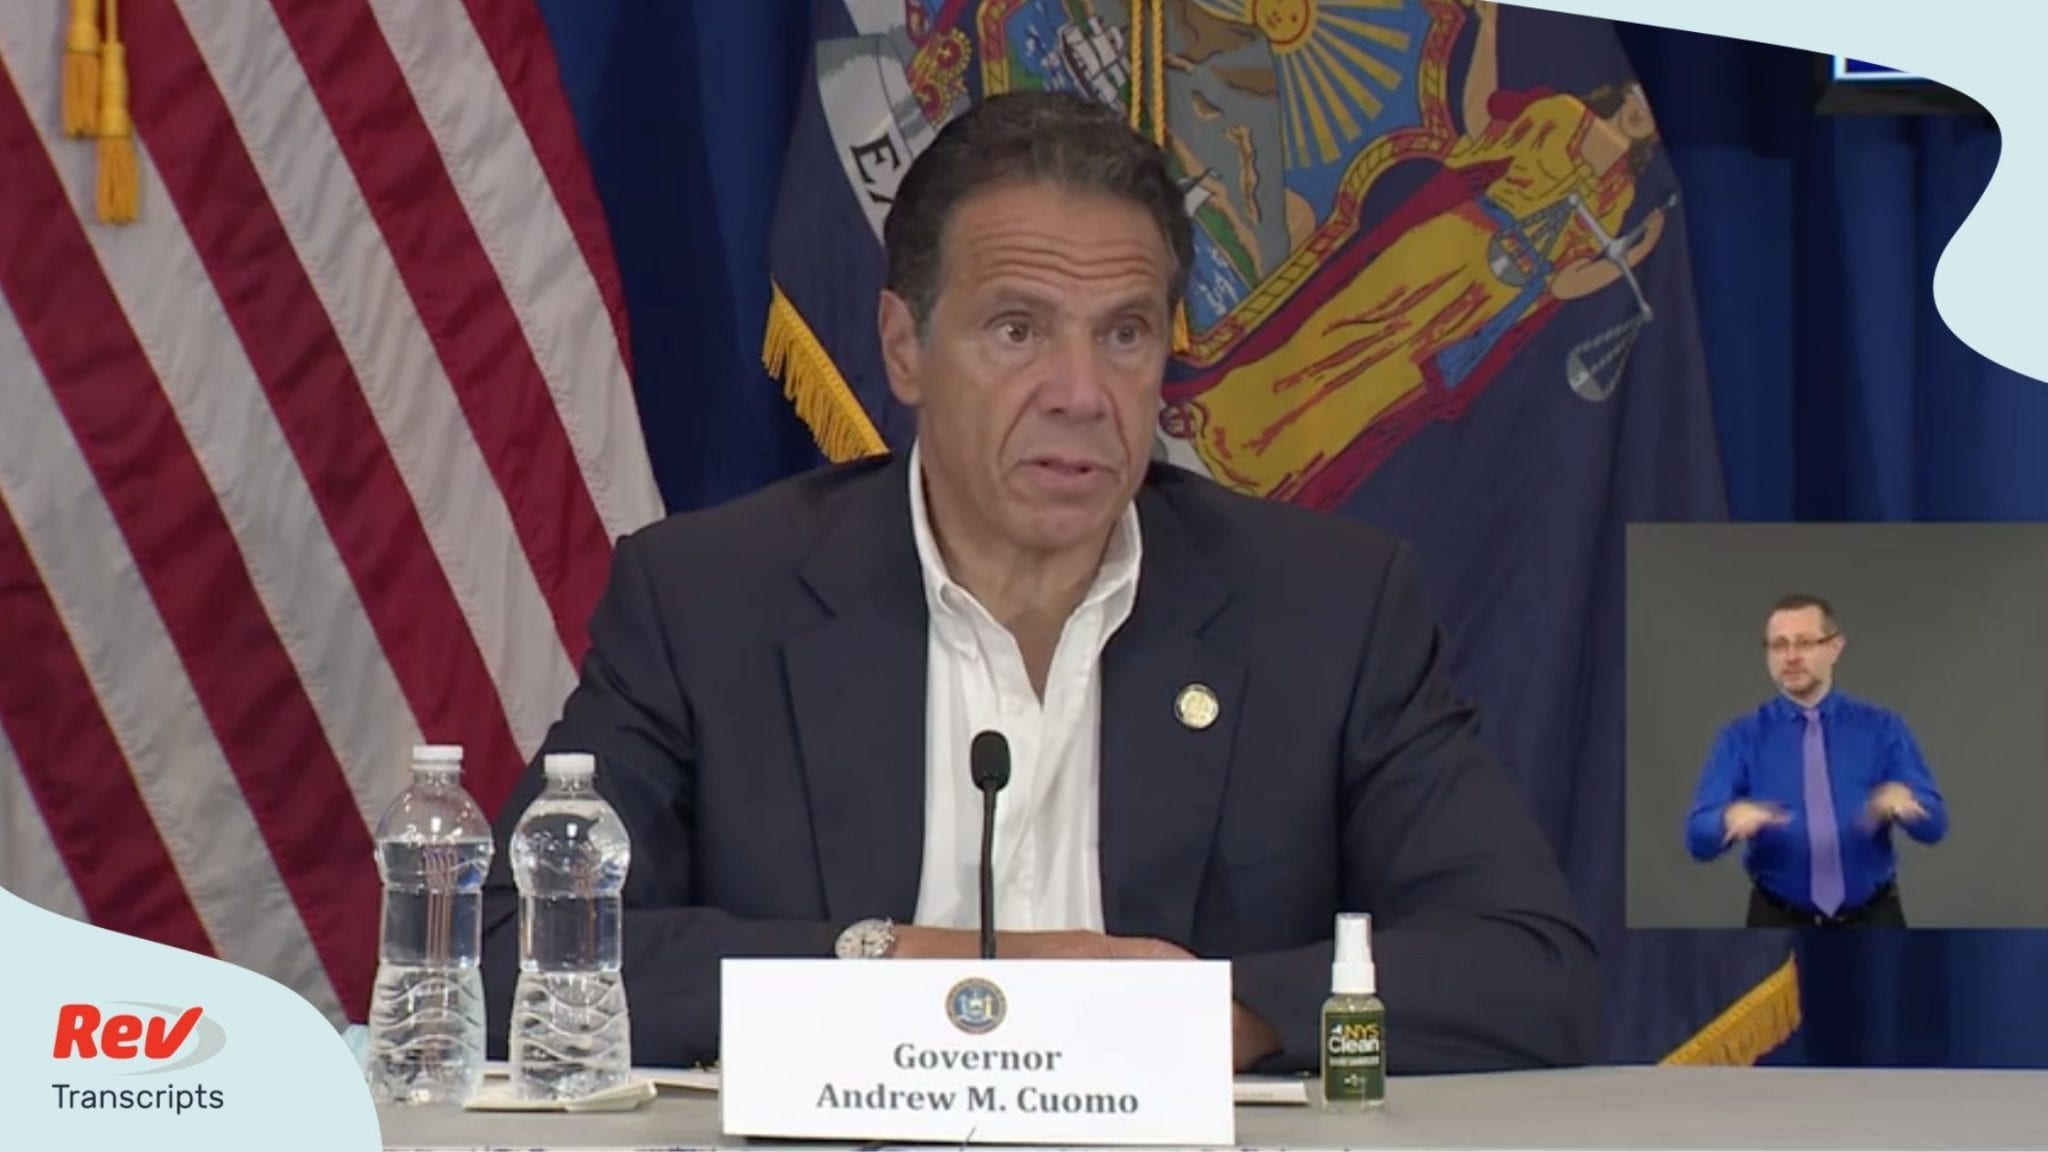 Governor Cuomo held a press conference on July 20